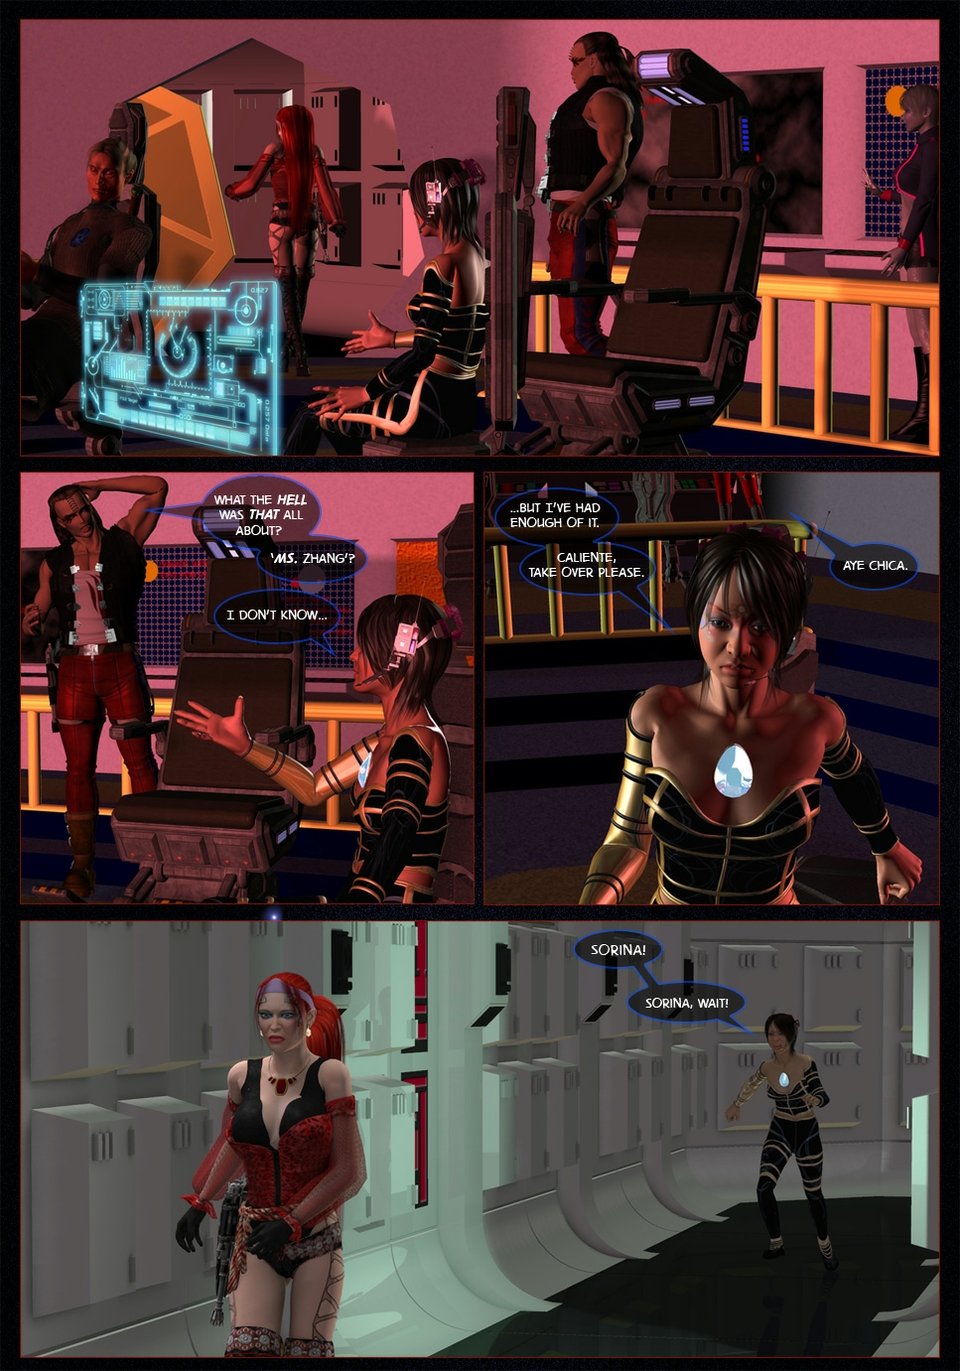 Voyage of the Proken Promise - Issue 8, Page 3 - Zee's Had Enough